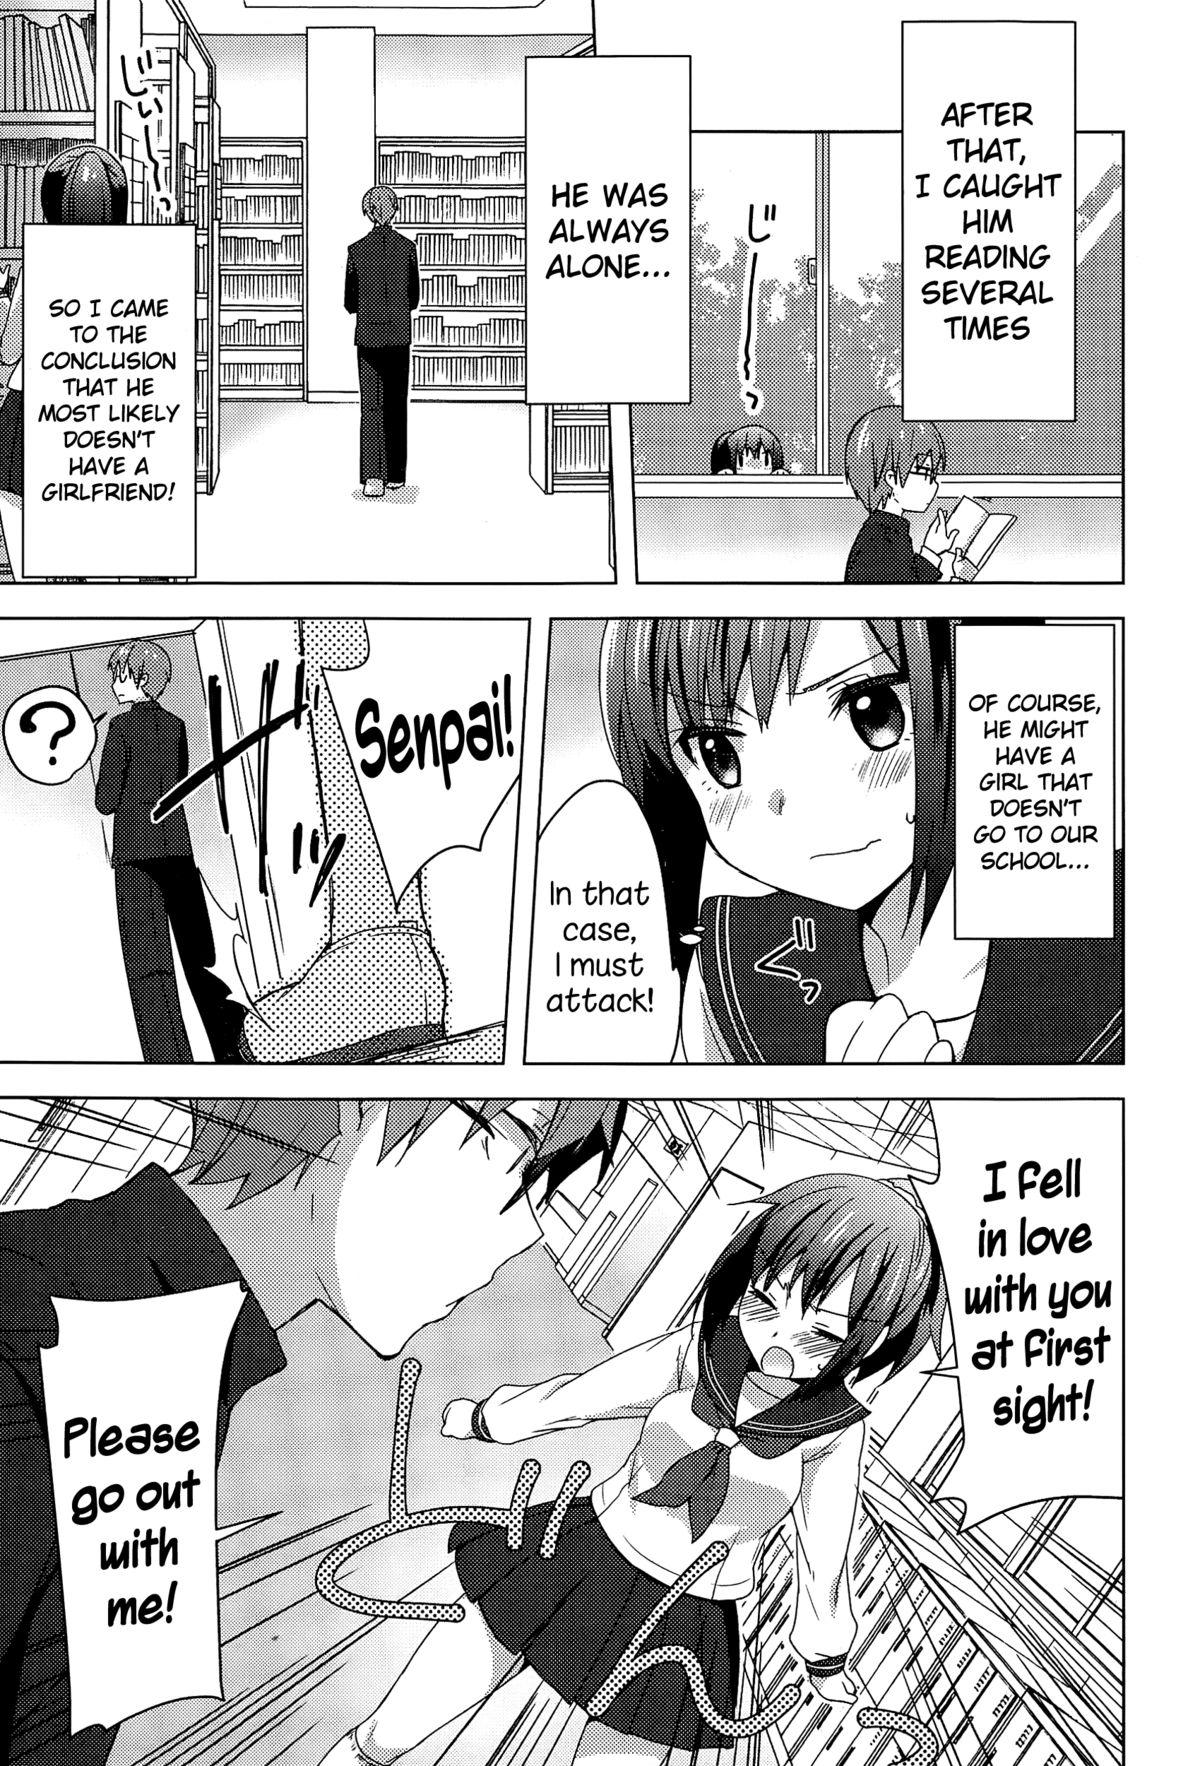 Friends Houkago Spats Club - Page 3